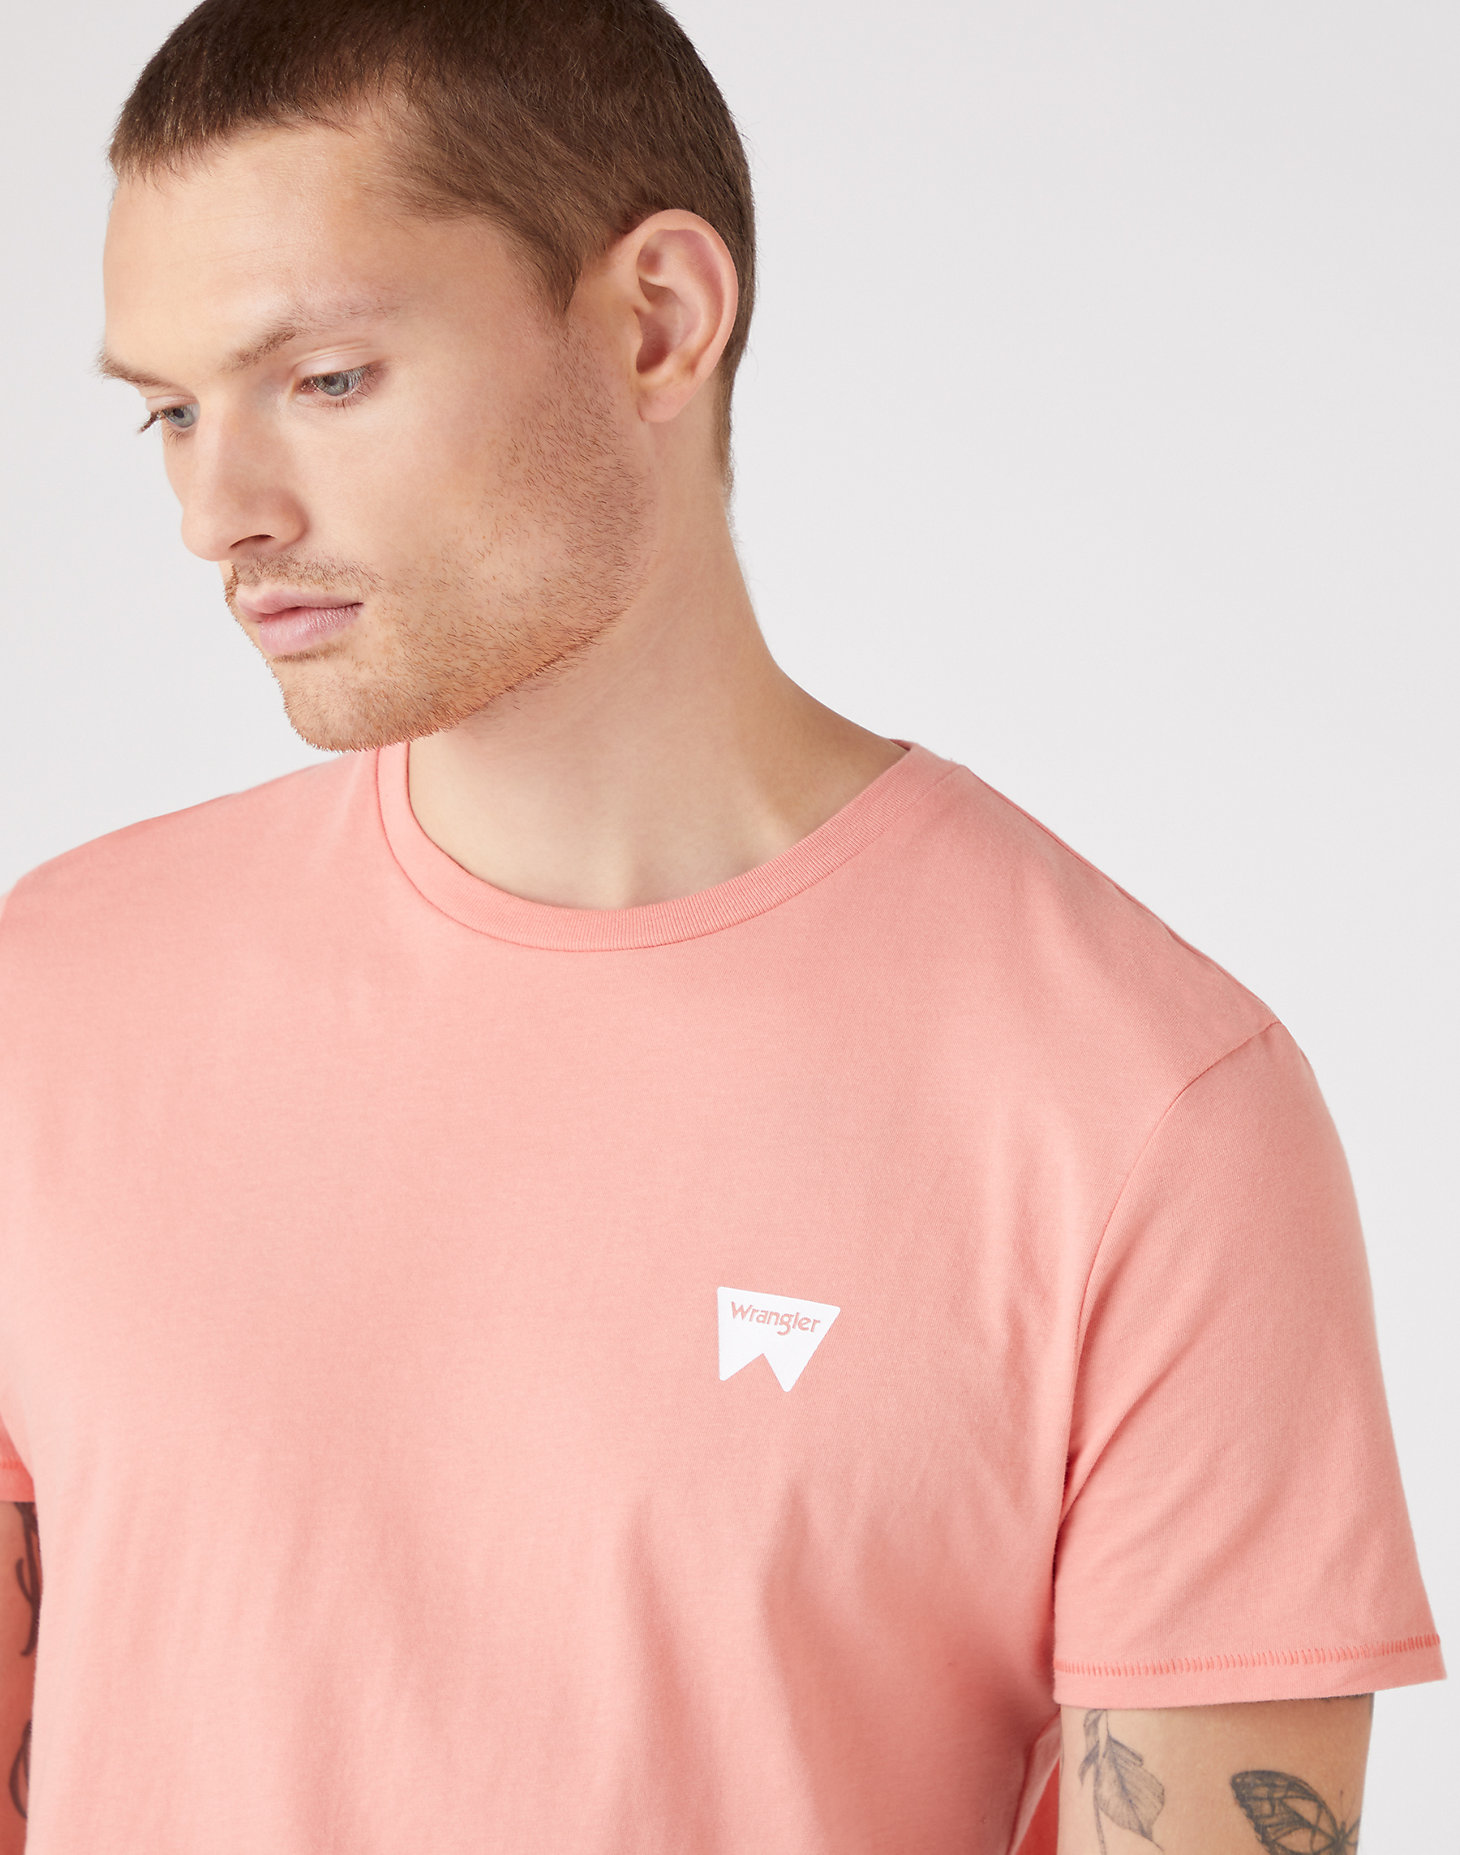 Sign Off Tee in Spiced Coral alternative view 3